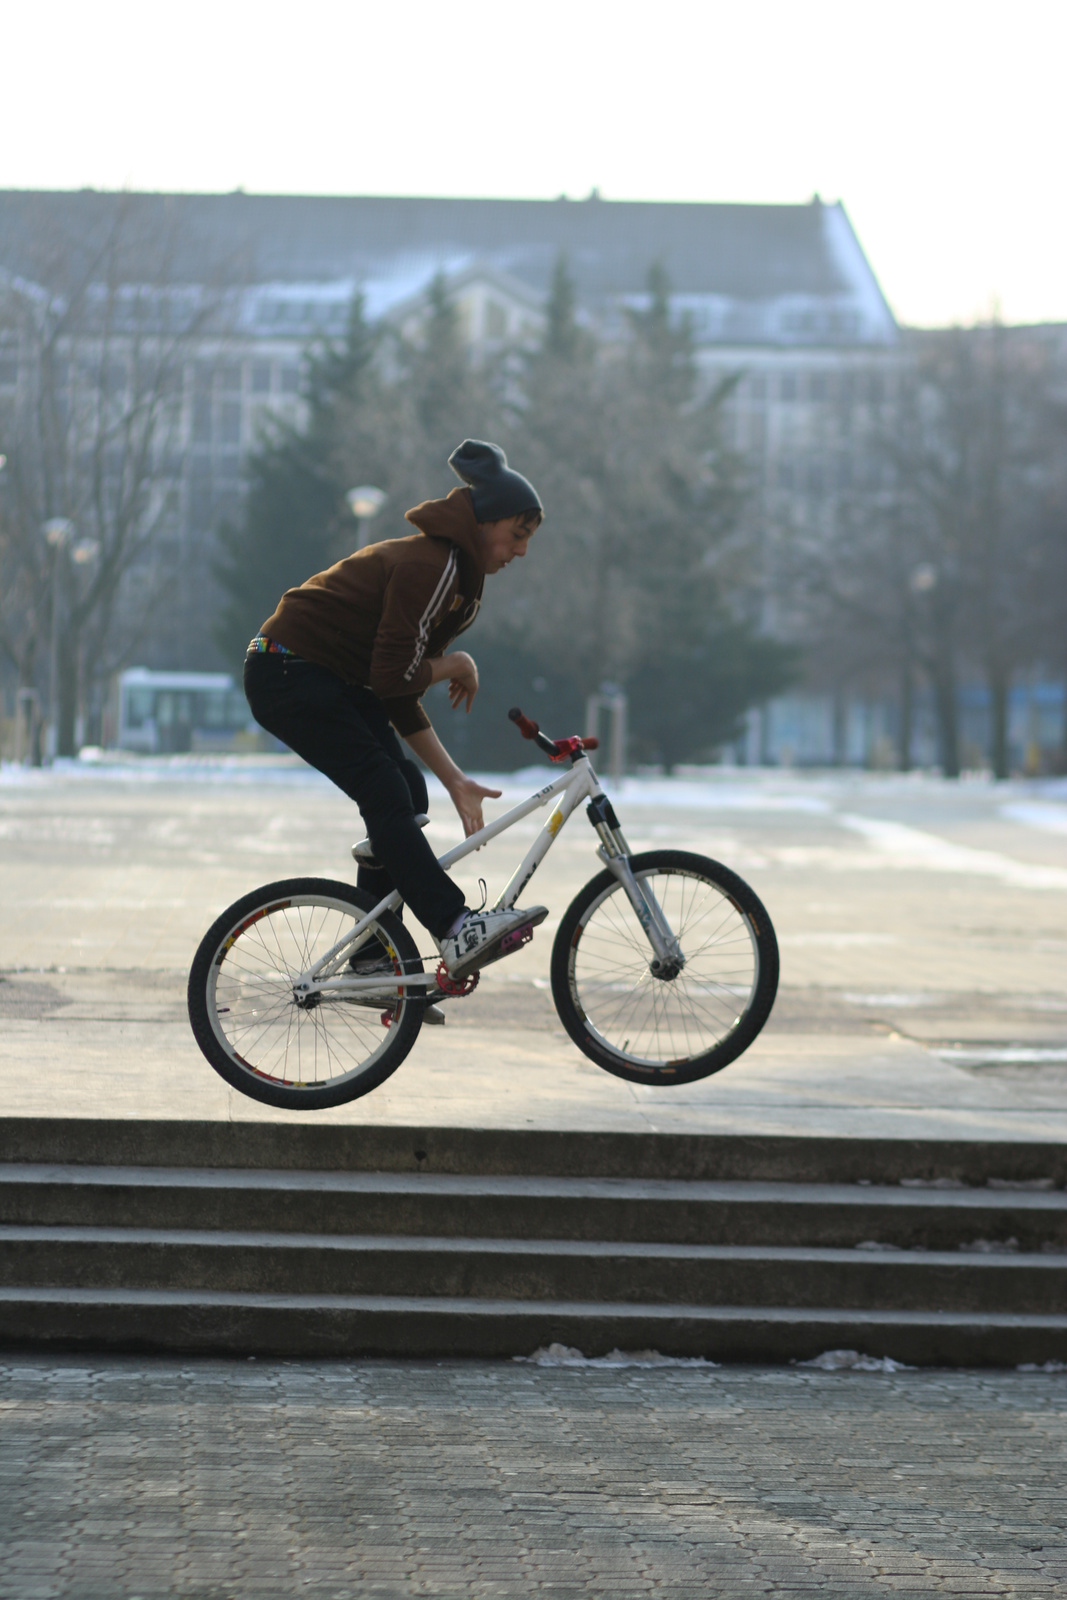 4stairs 180 barspin (KLB)